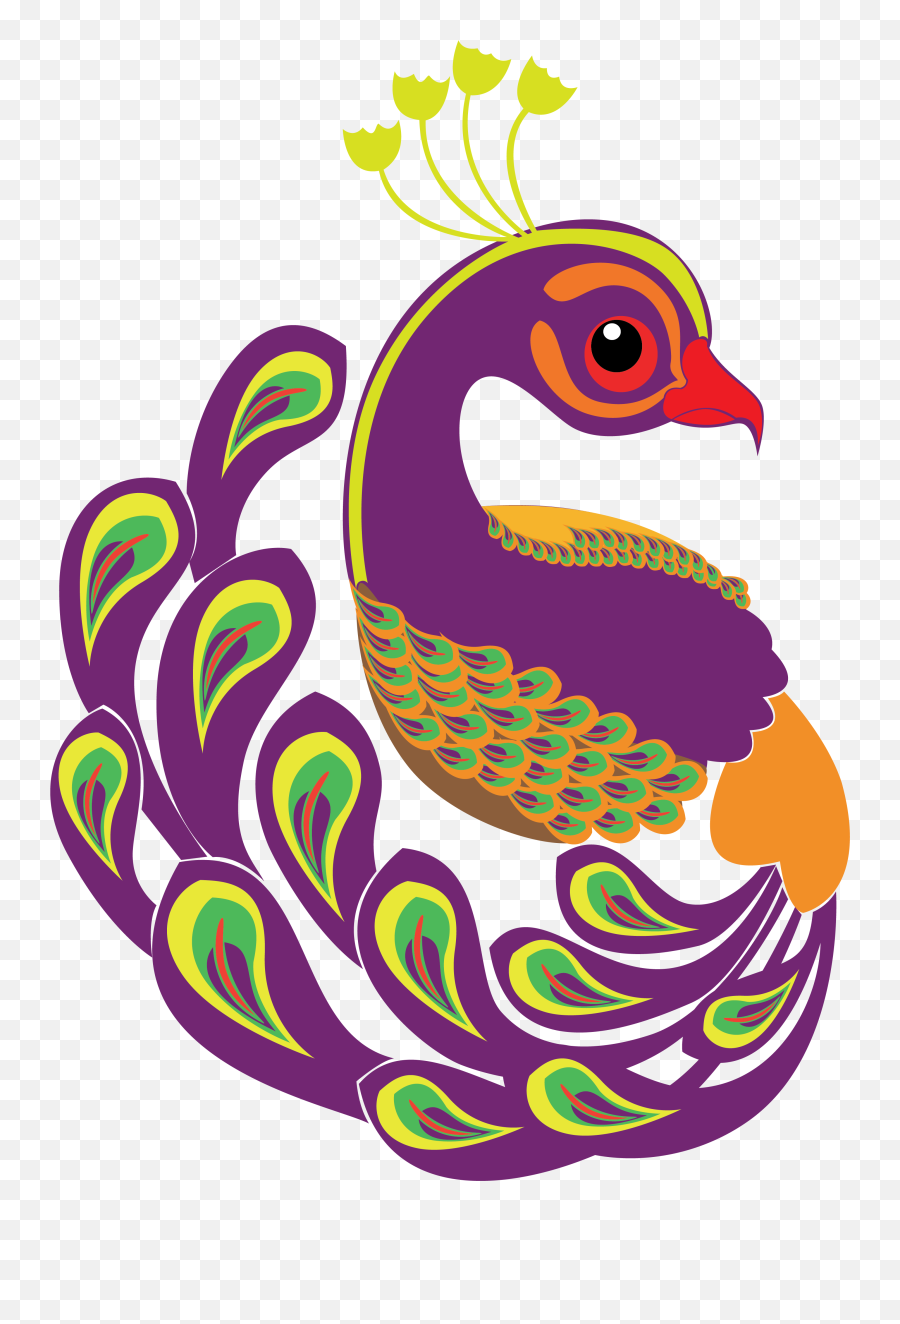 Peacock - Illustration Clipart Full Size Clipart Emoji,Peacock Clipart Free